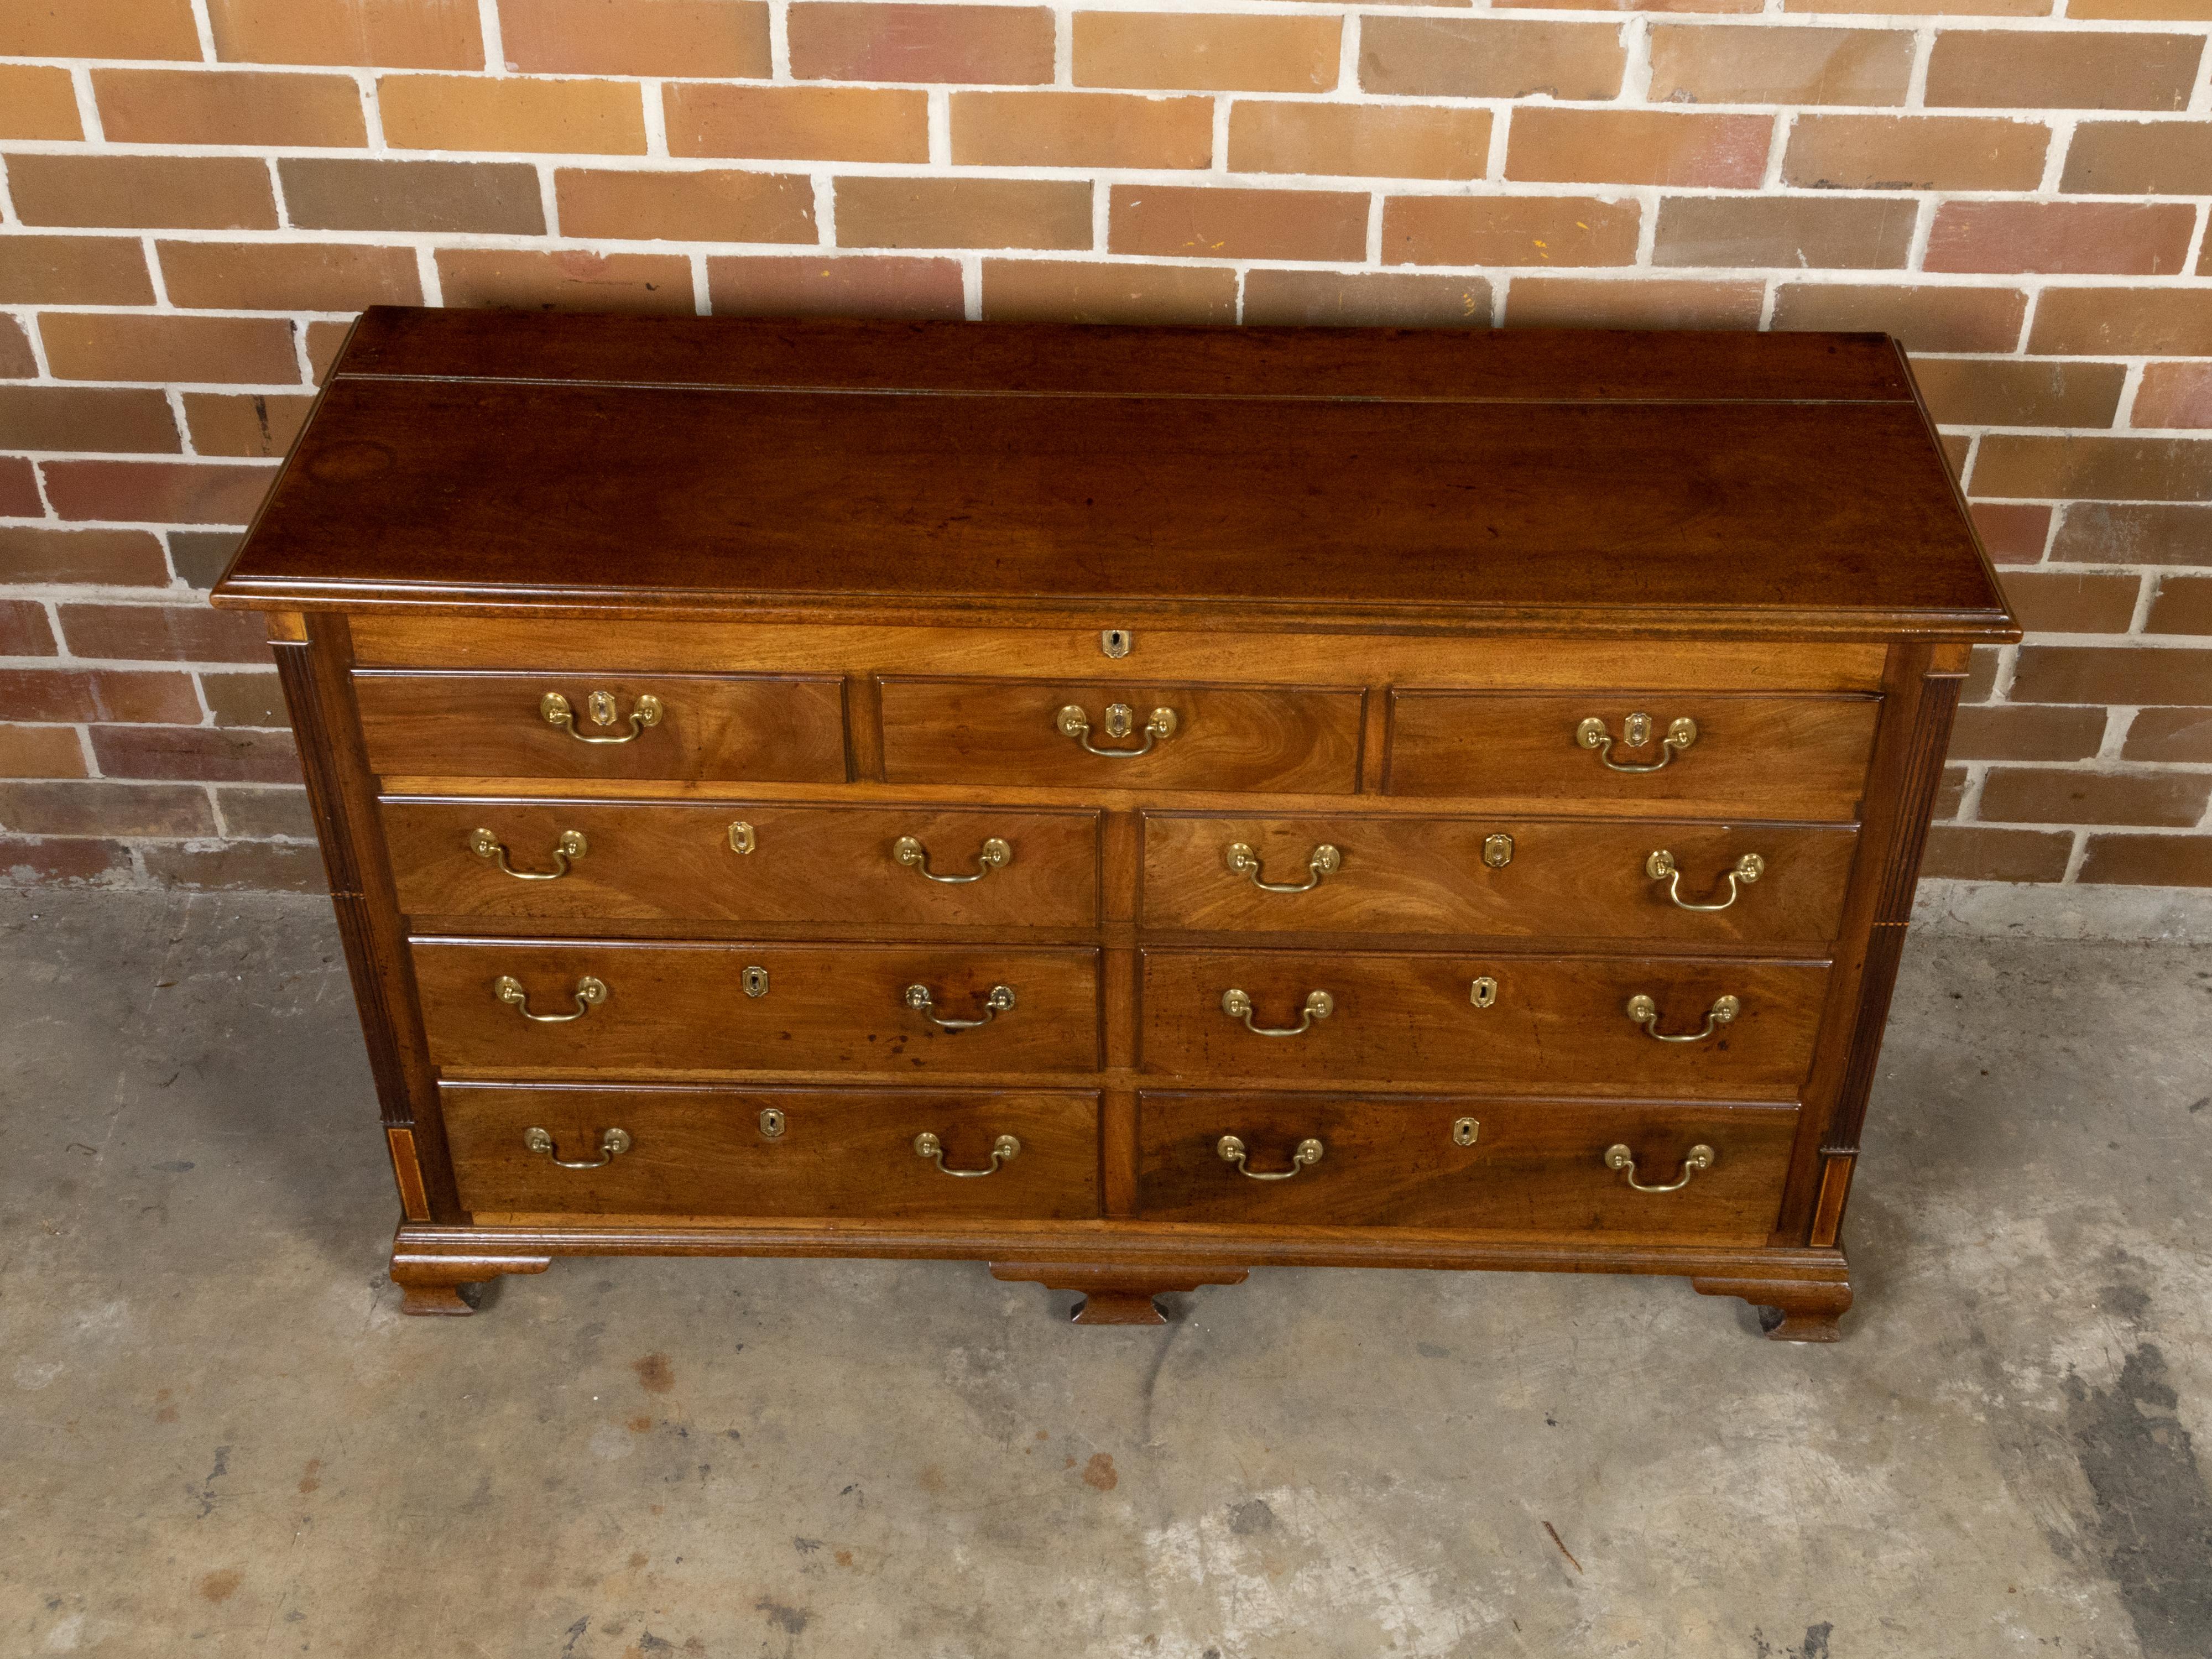 Inlay English Walnut 19th Century Flip Top Sideboard with Drawers and Brass Hardware For Sale